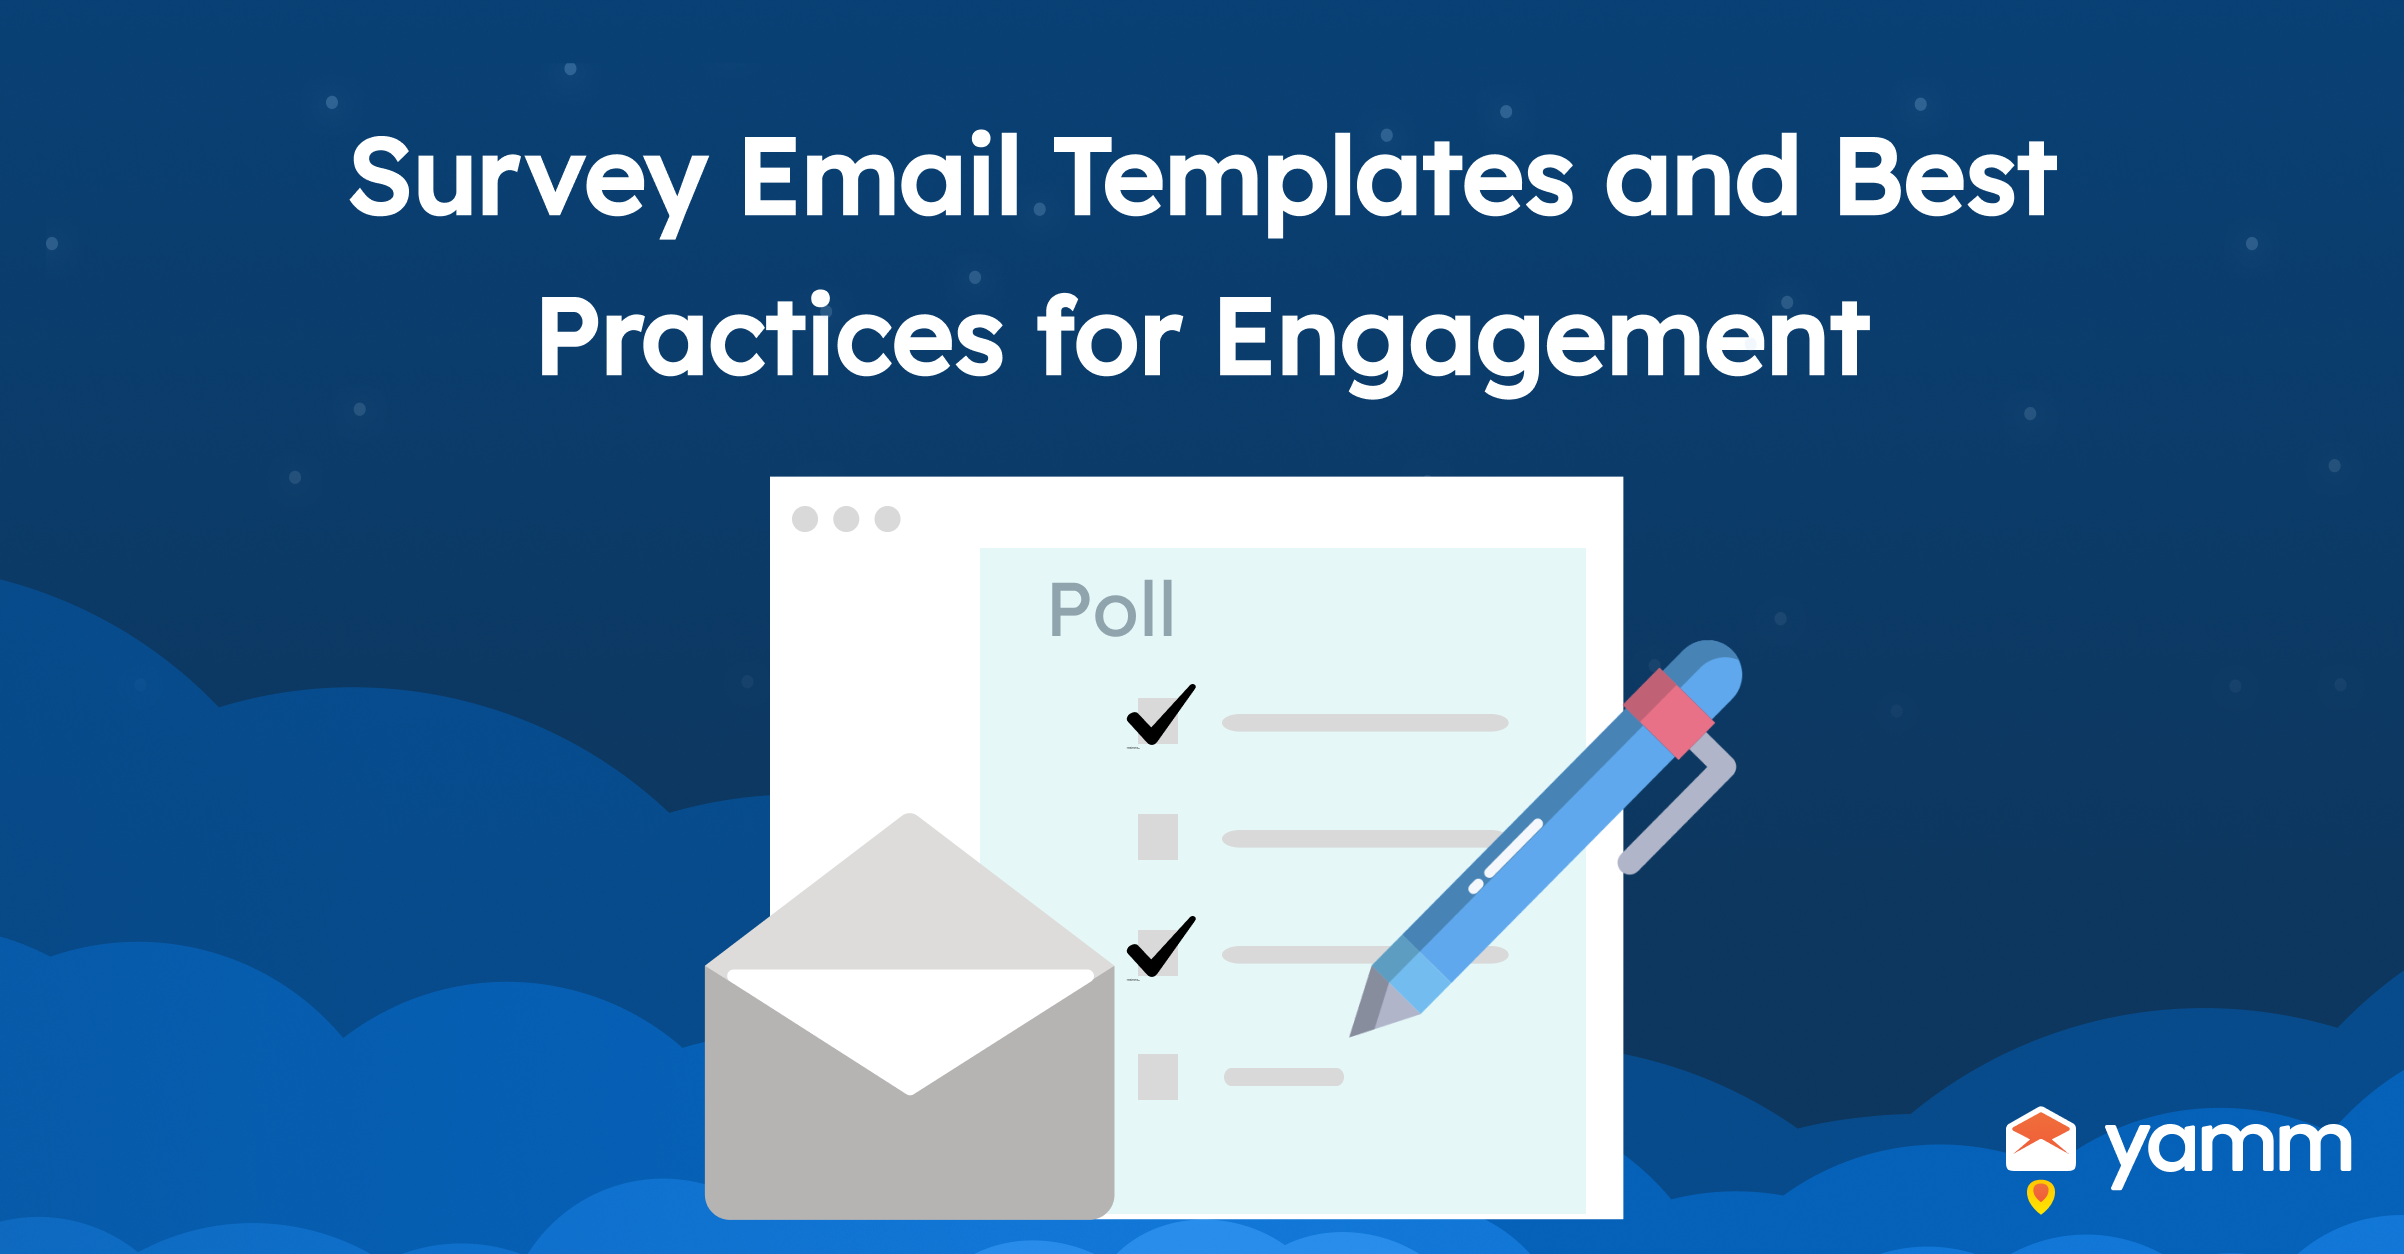 Survey Email Templates and Best Practices for Engagement